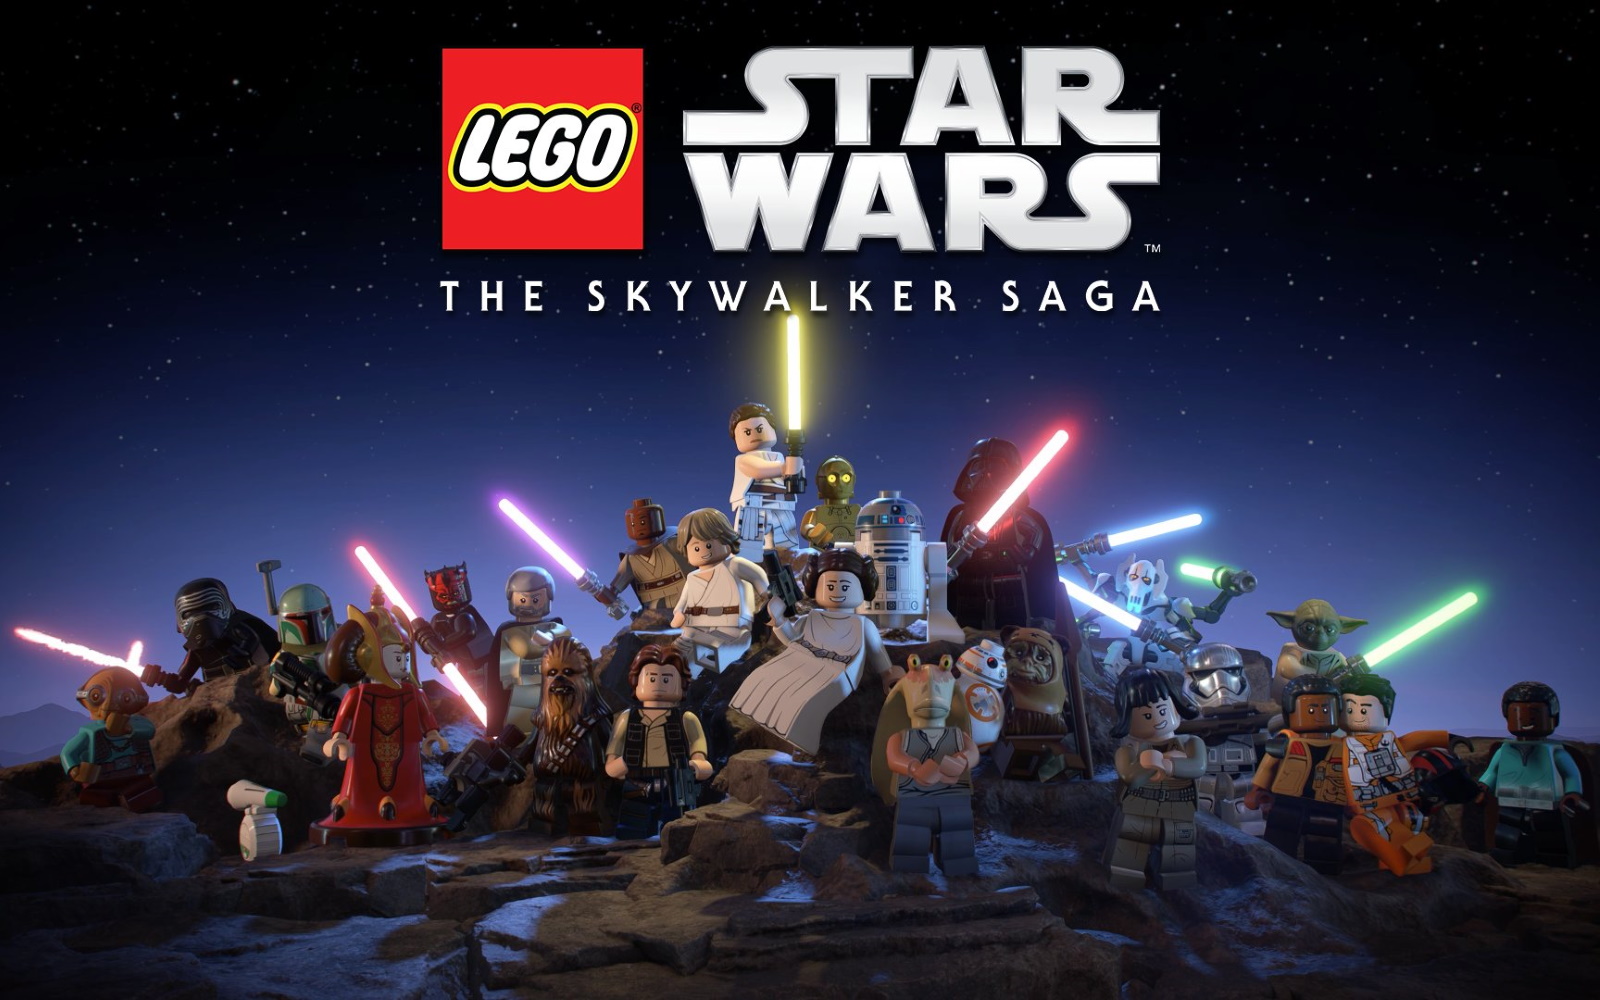 New Gameplay Overview And Release Date For LEGO Star Wars Revealed